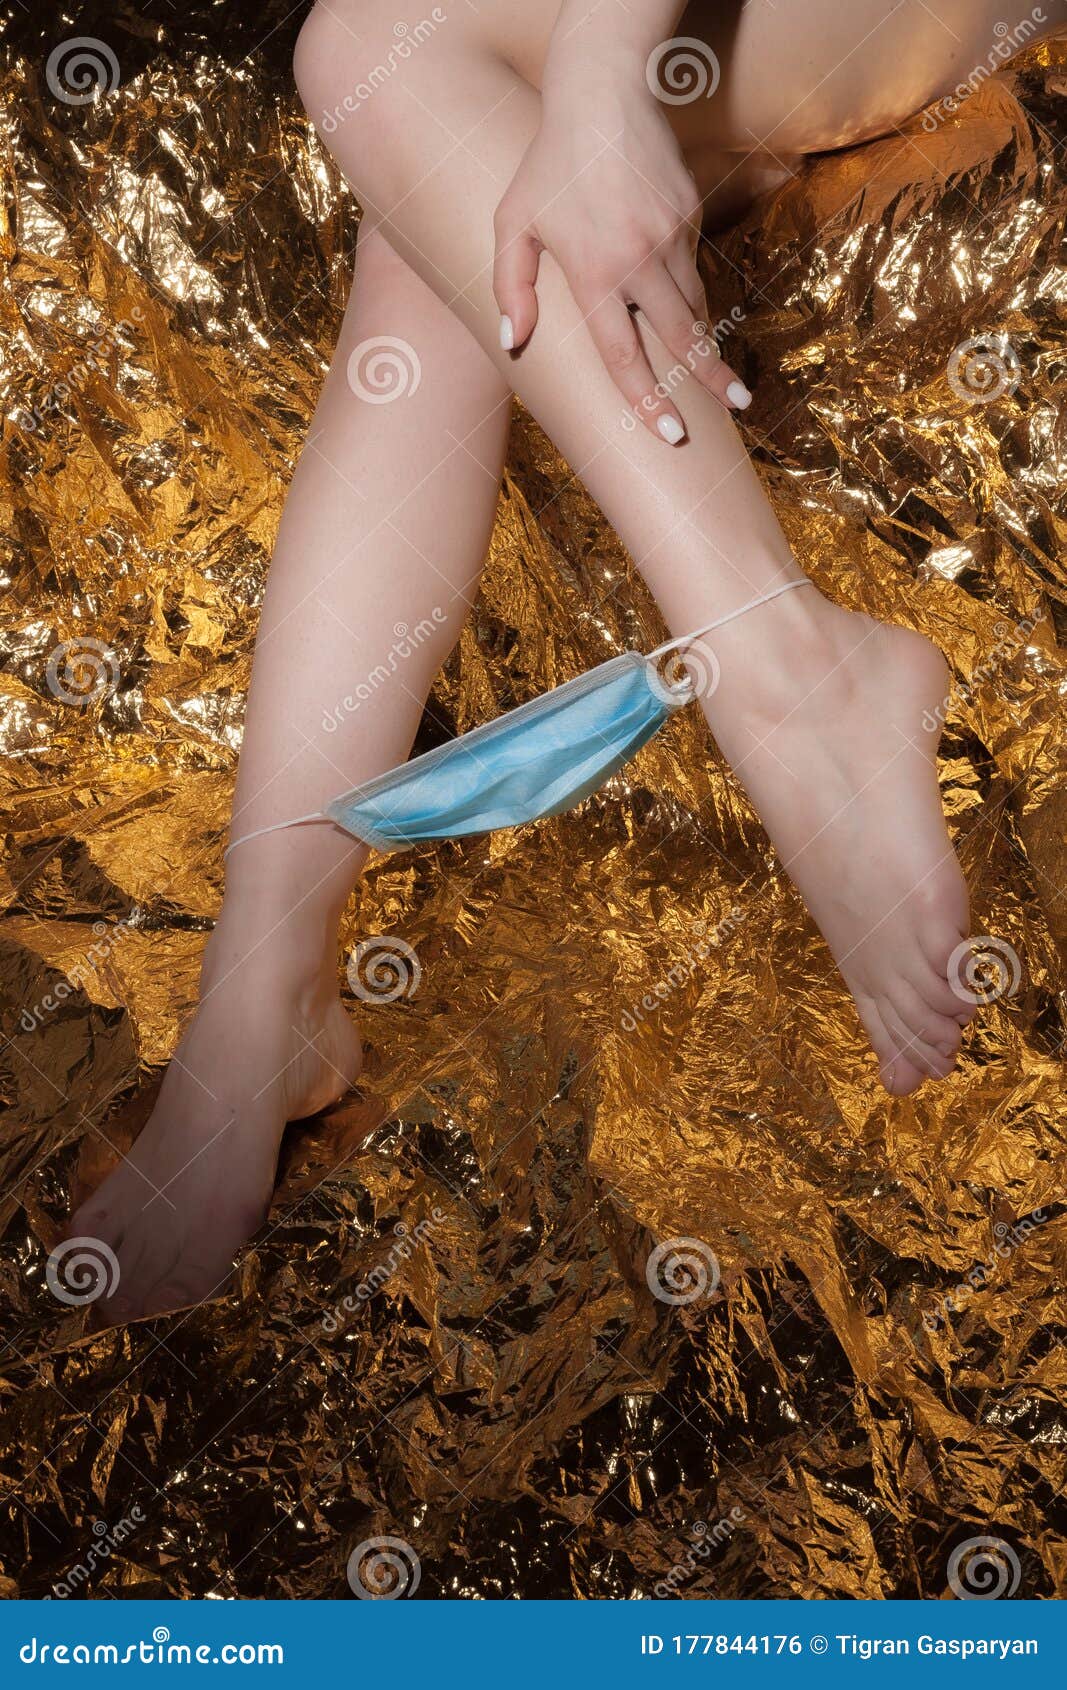 334 Covid Sex Stock Photos - Free & Royalty-Free Stock Photos from  Dreamstime